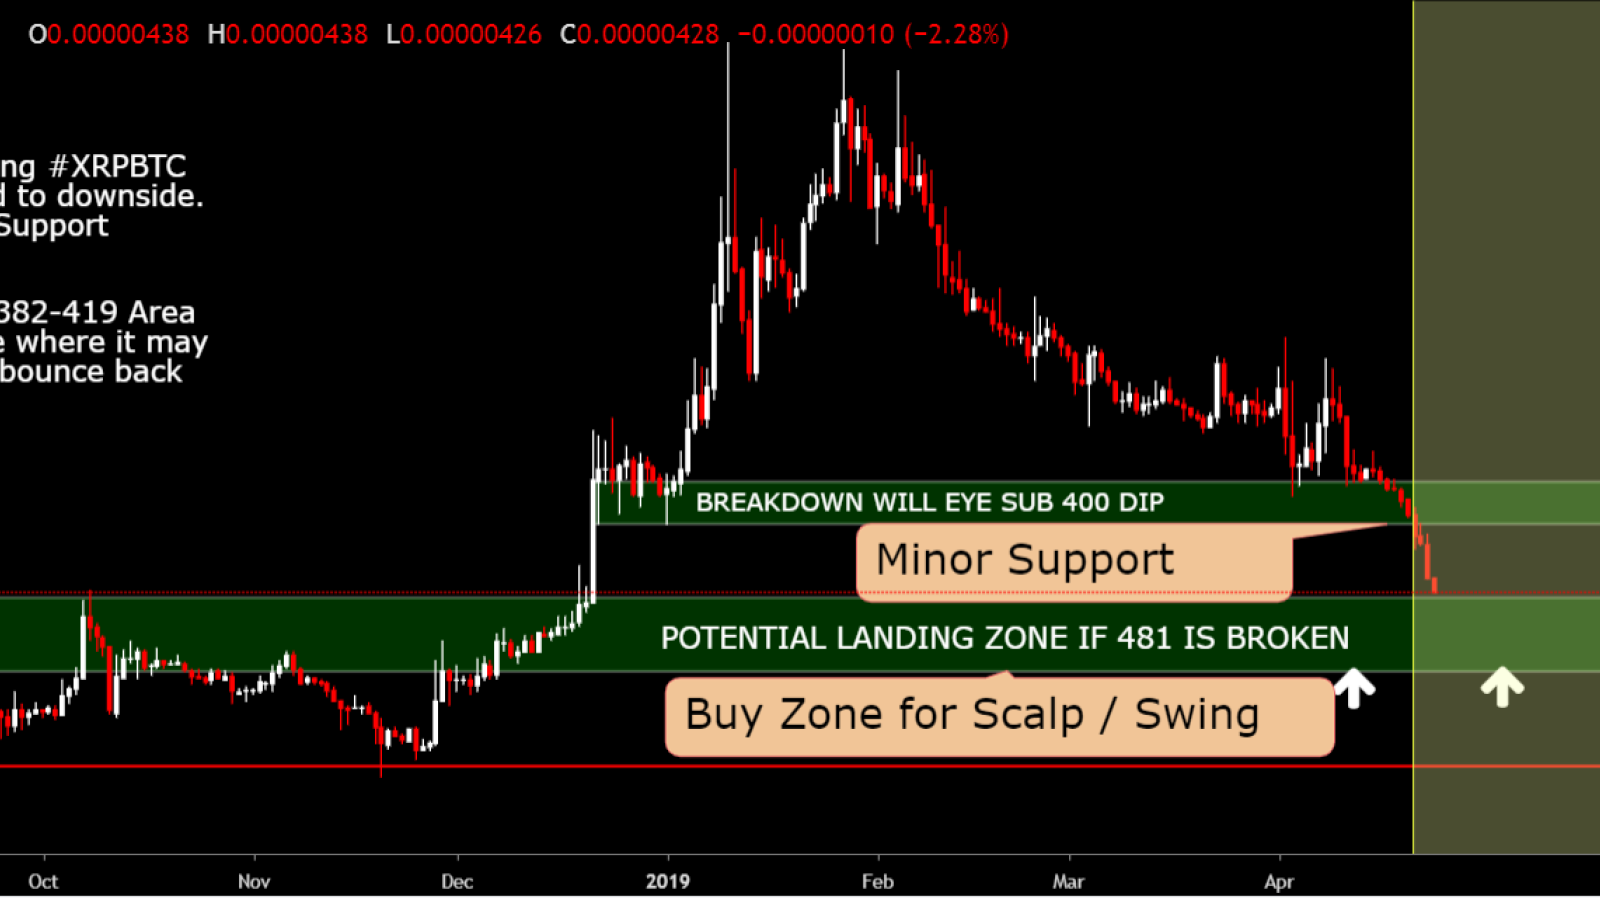 TRX might fall to 382-419 area if support fails